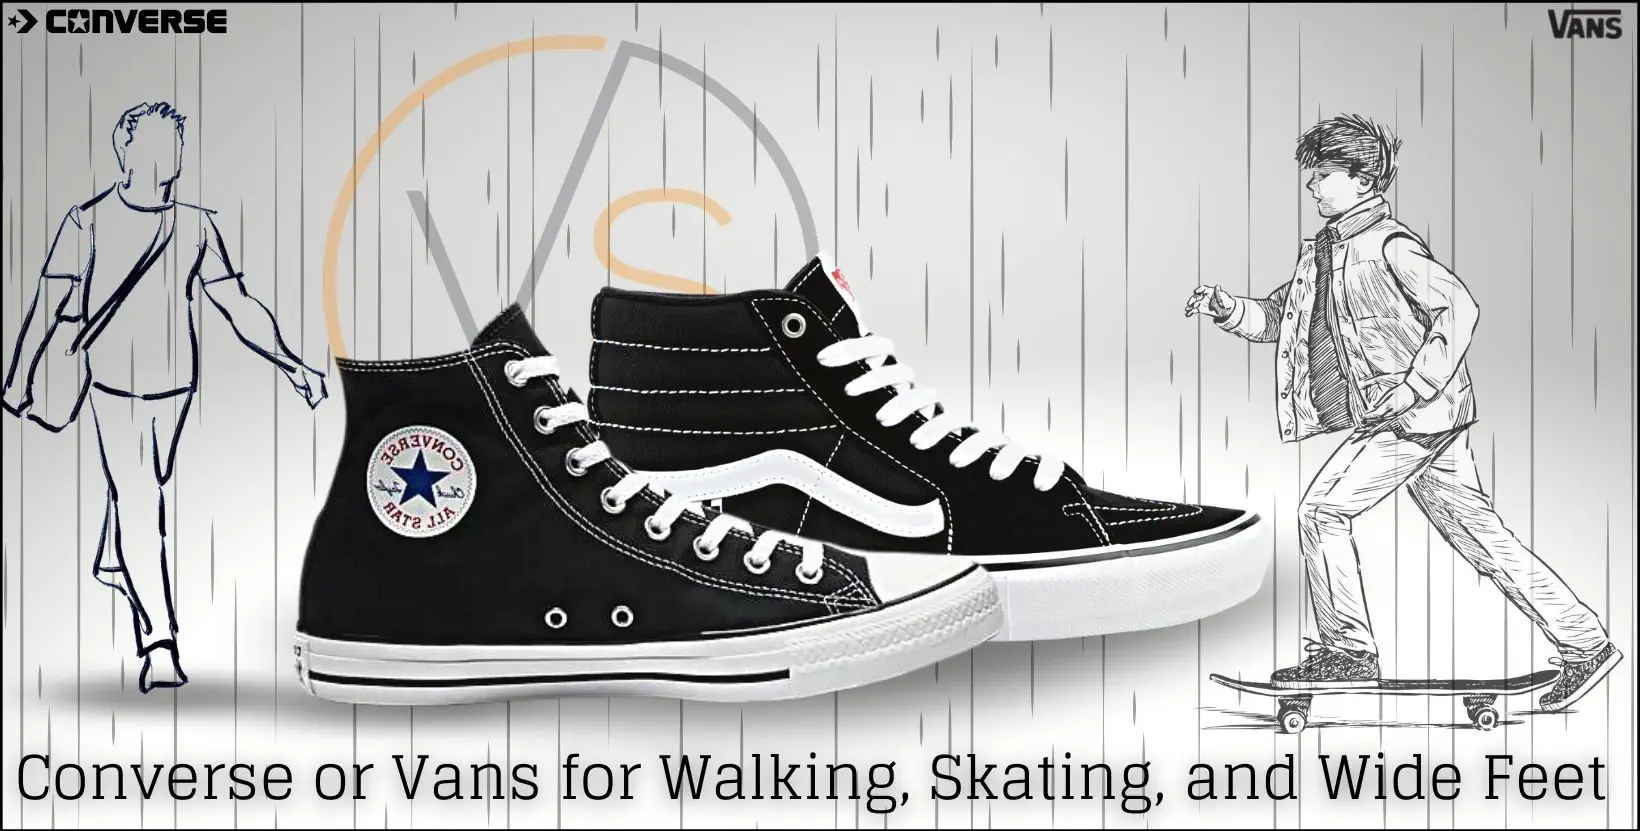 Converse or Vans Shoes for Walking, Skating, and Wide Feet?